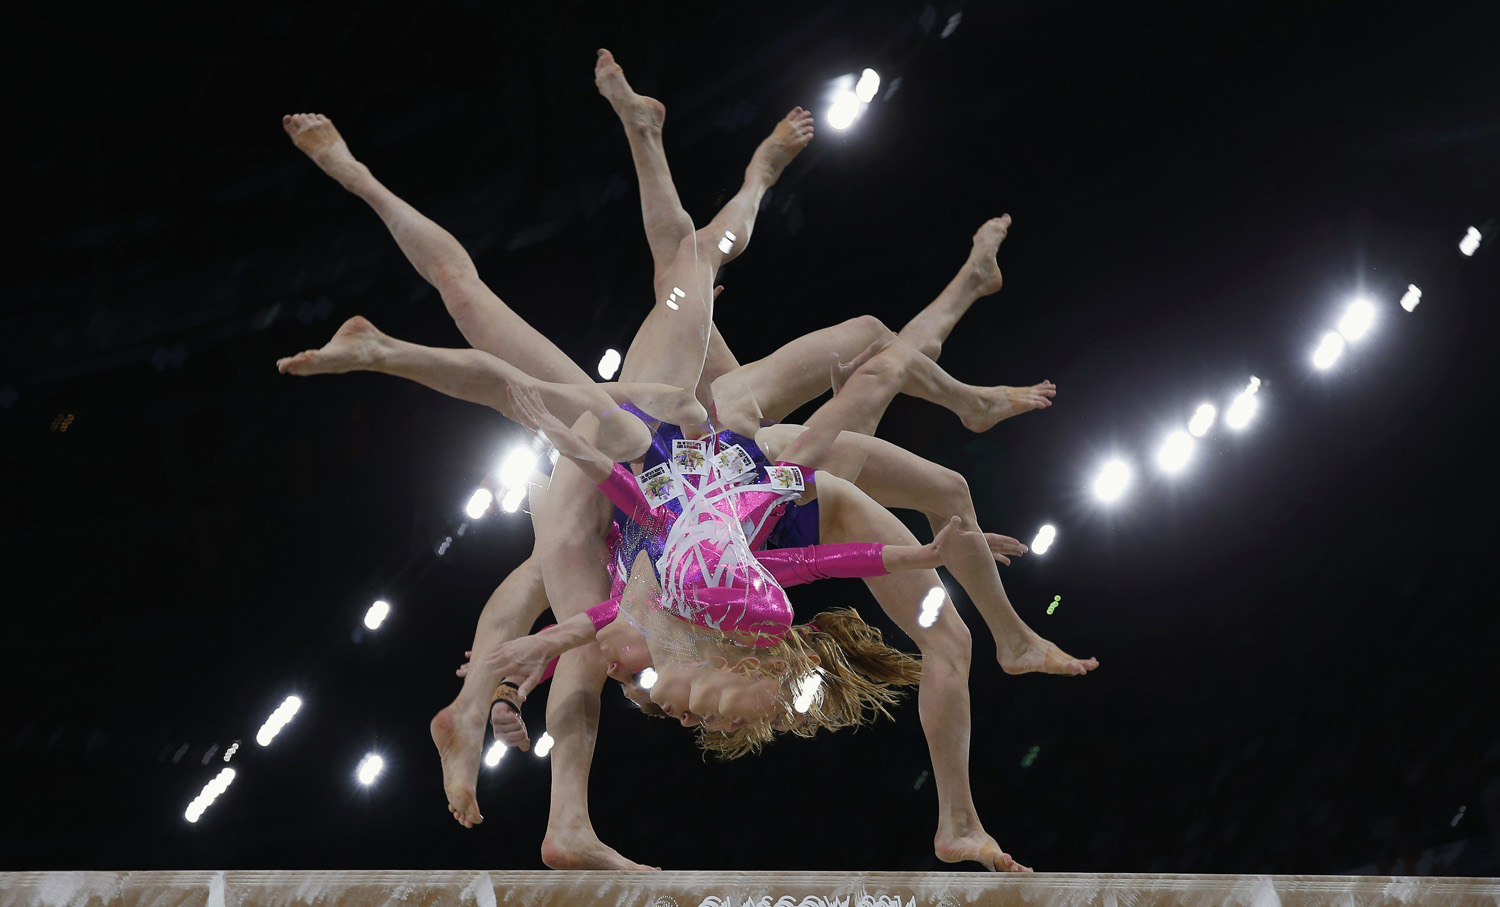 Australia's Olivia Vivian performs at the women's All-Around Artistic Gymnastics at the 2014 Commonwealth Games in Glasgow, Scotland, July 30, 2014.